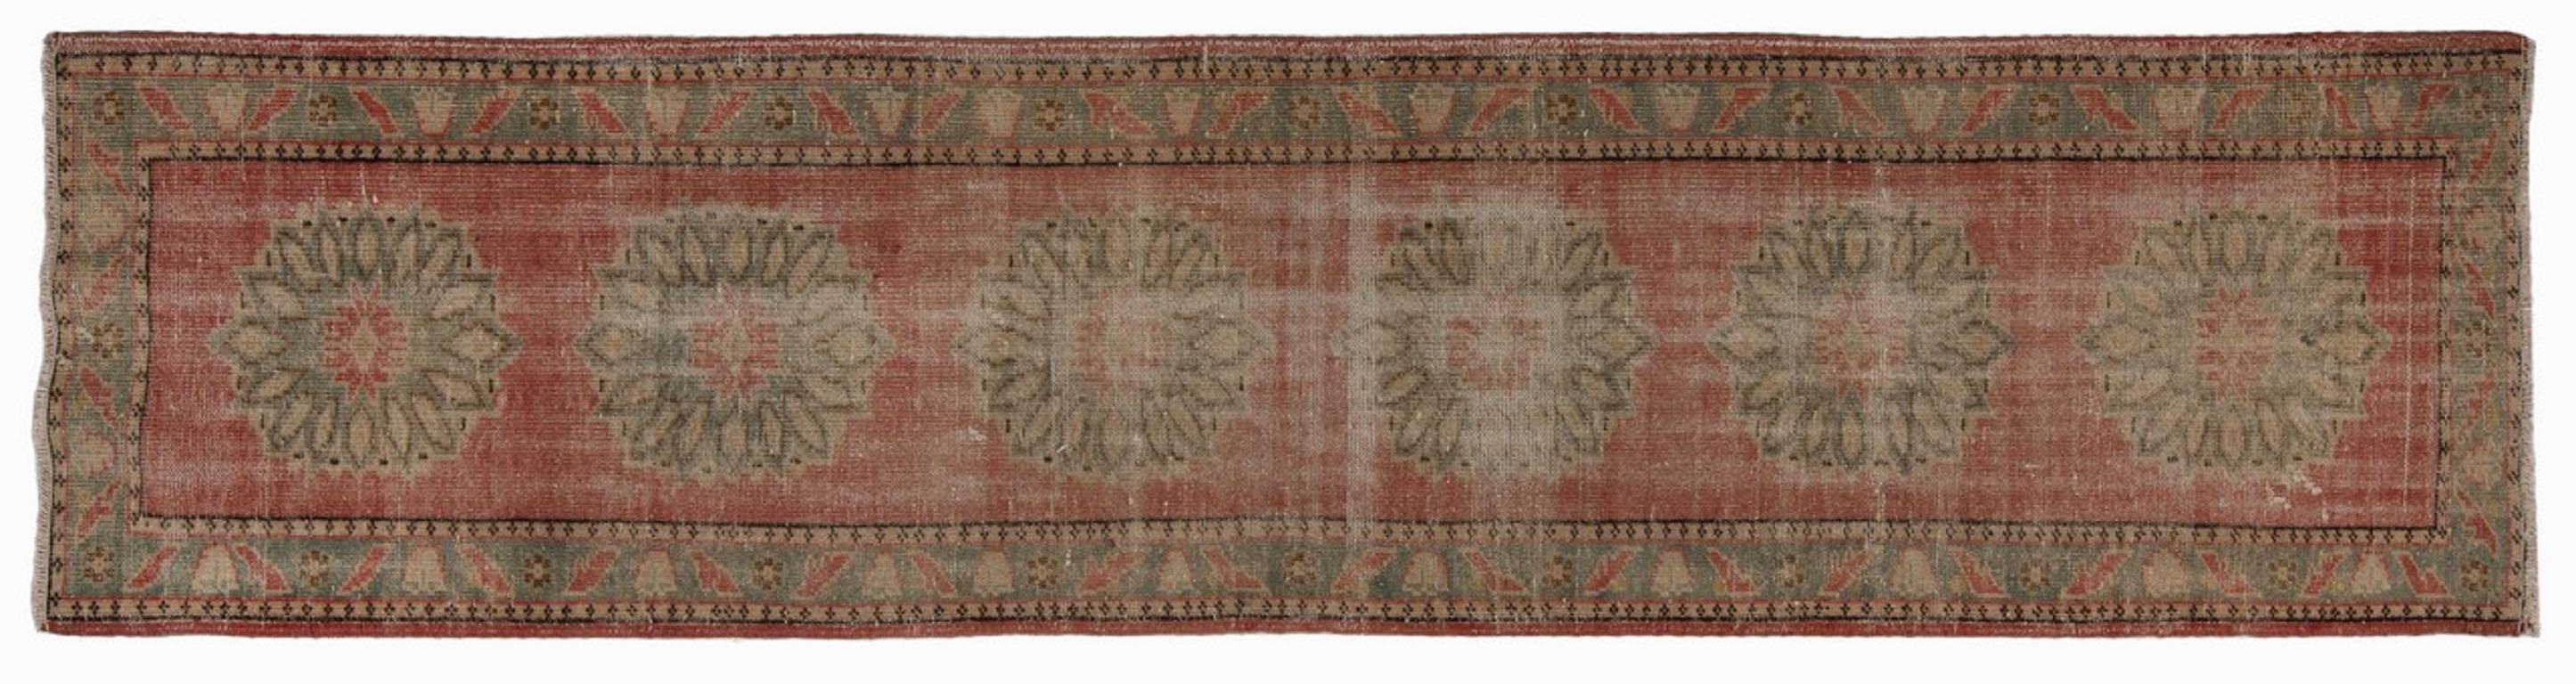 Oushak 2.7x11.2 Ft Vintage Handmade Anatolian Runner Rug in Faded Red, Blue and Stone For Sale